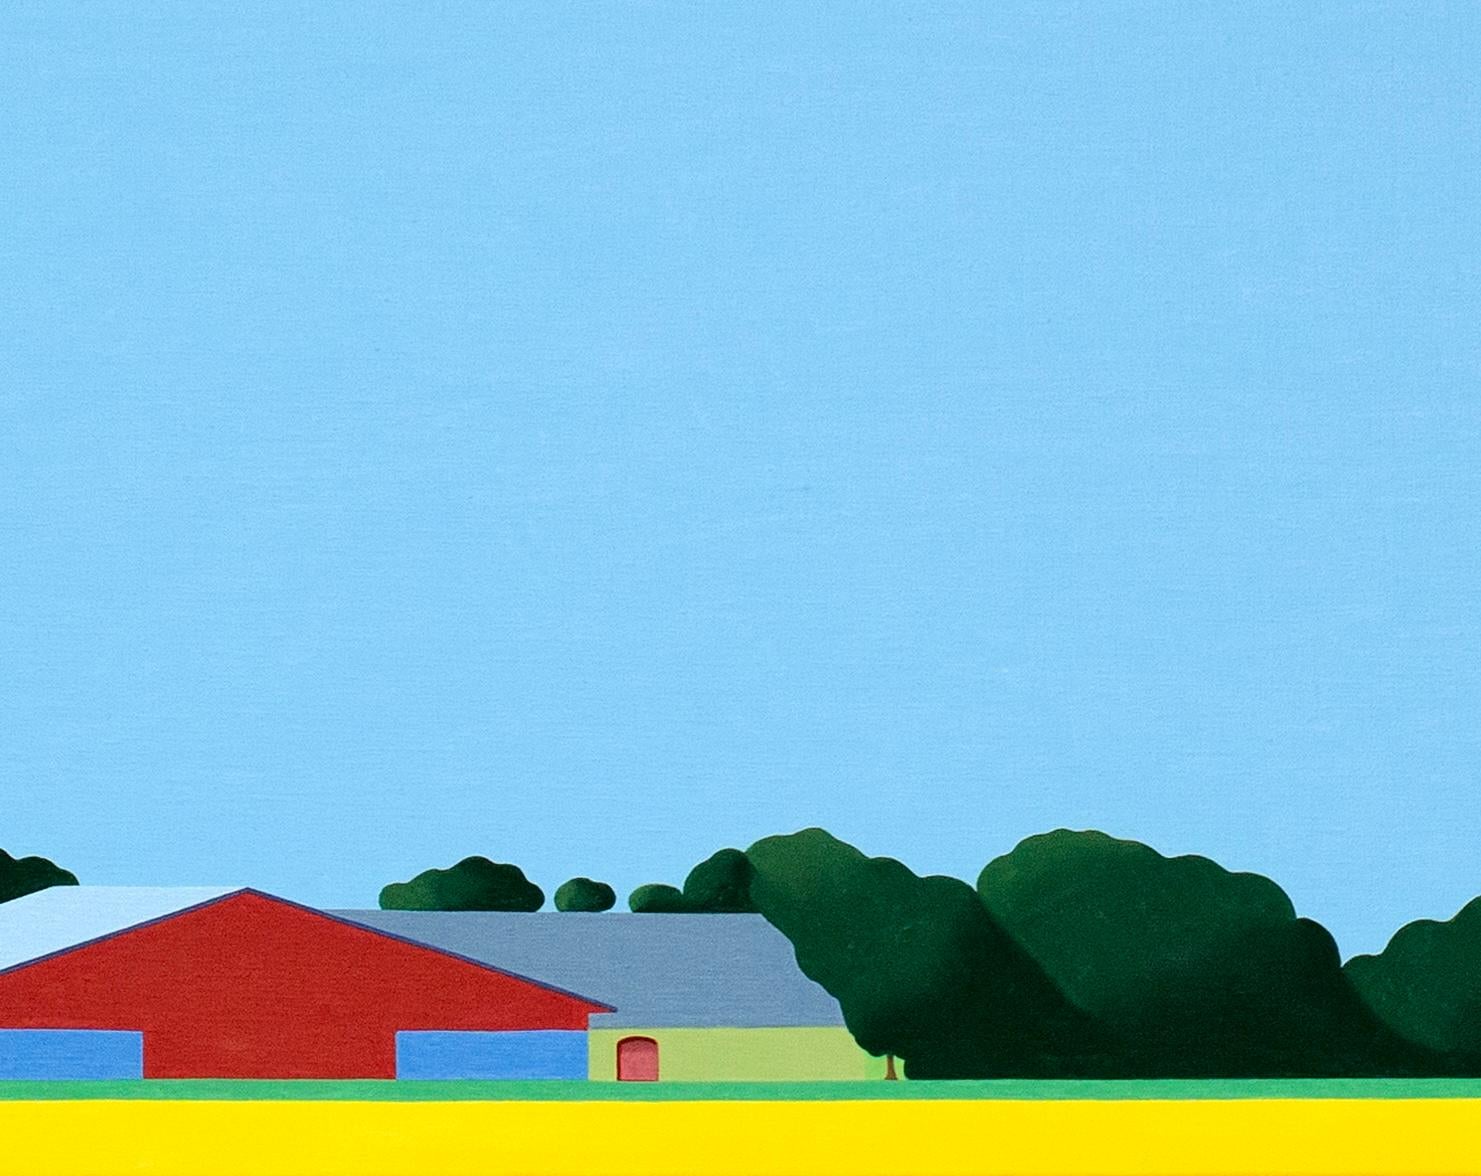 This beautiful landscape painting by Jeroen Allart is part of his minimalist landscape painting he did in his home country the Netherlands.

A farm stands before you on the horizon. A windmill majestically slices the blue sky. A bird, painted in